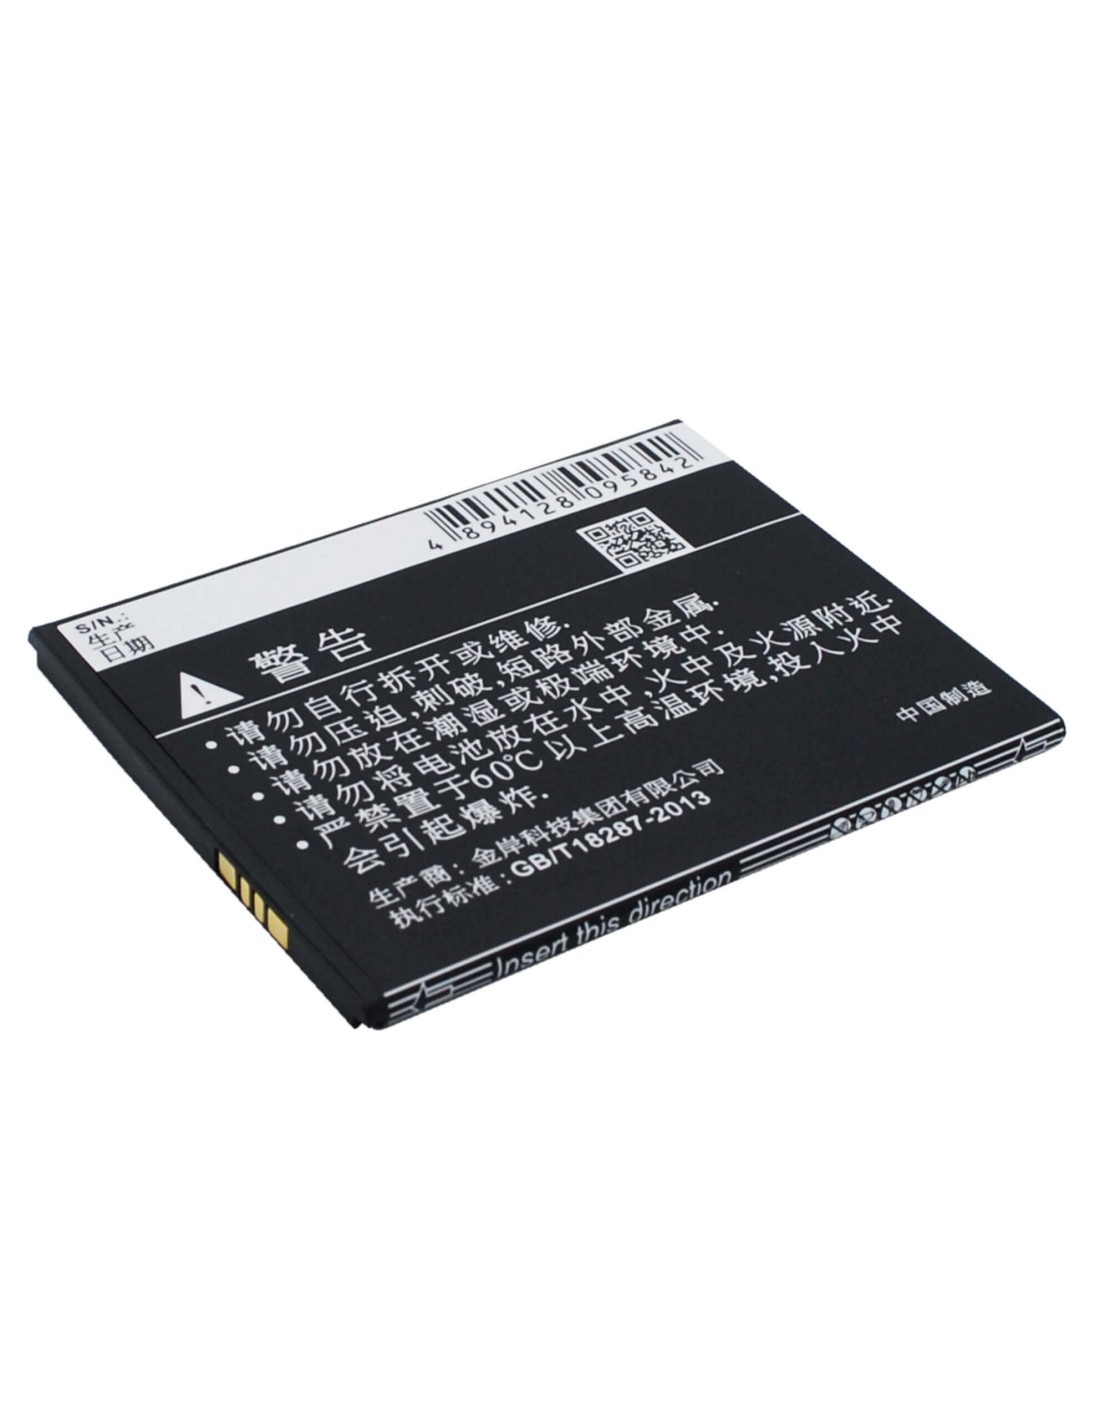 Battery for Coolpad 5910, 5950, 8750 3.7V, 2100mAh - 7.77Wh